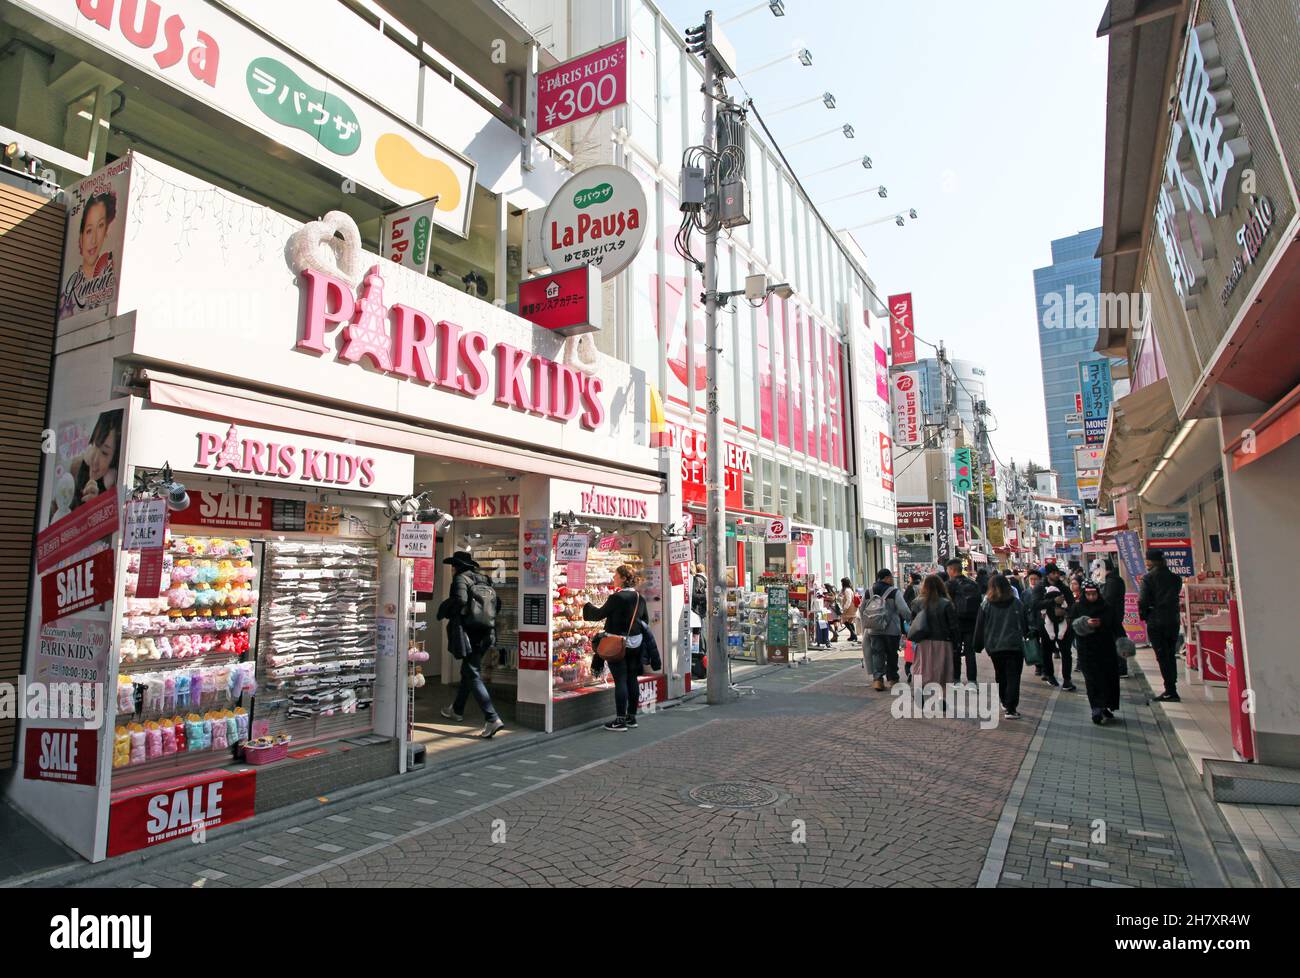 Takeshita Street or Takeshita-dori, a bustling street in the Harajuku part of Tokyo in Japan selling vibrant and extreme fashion, food, and more. Stock Photo